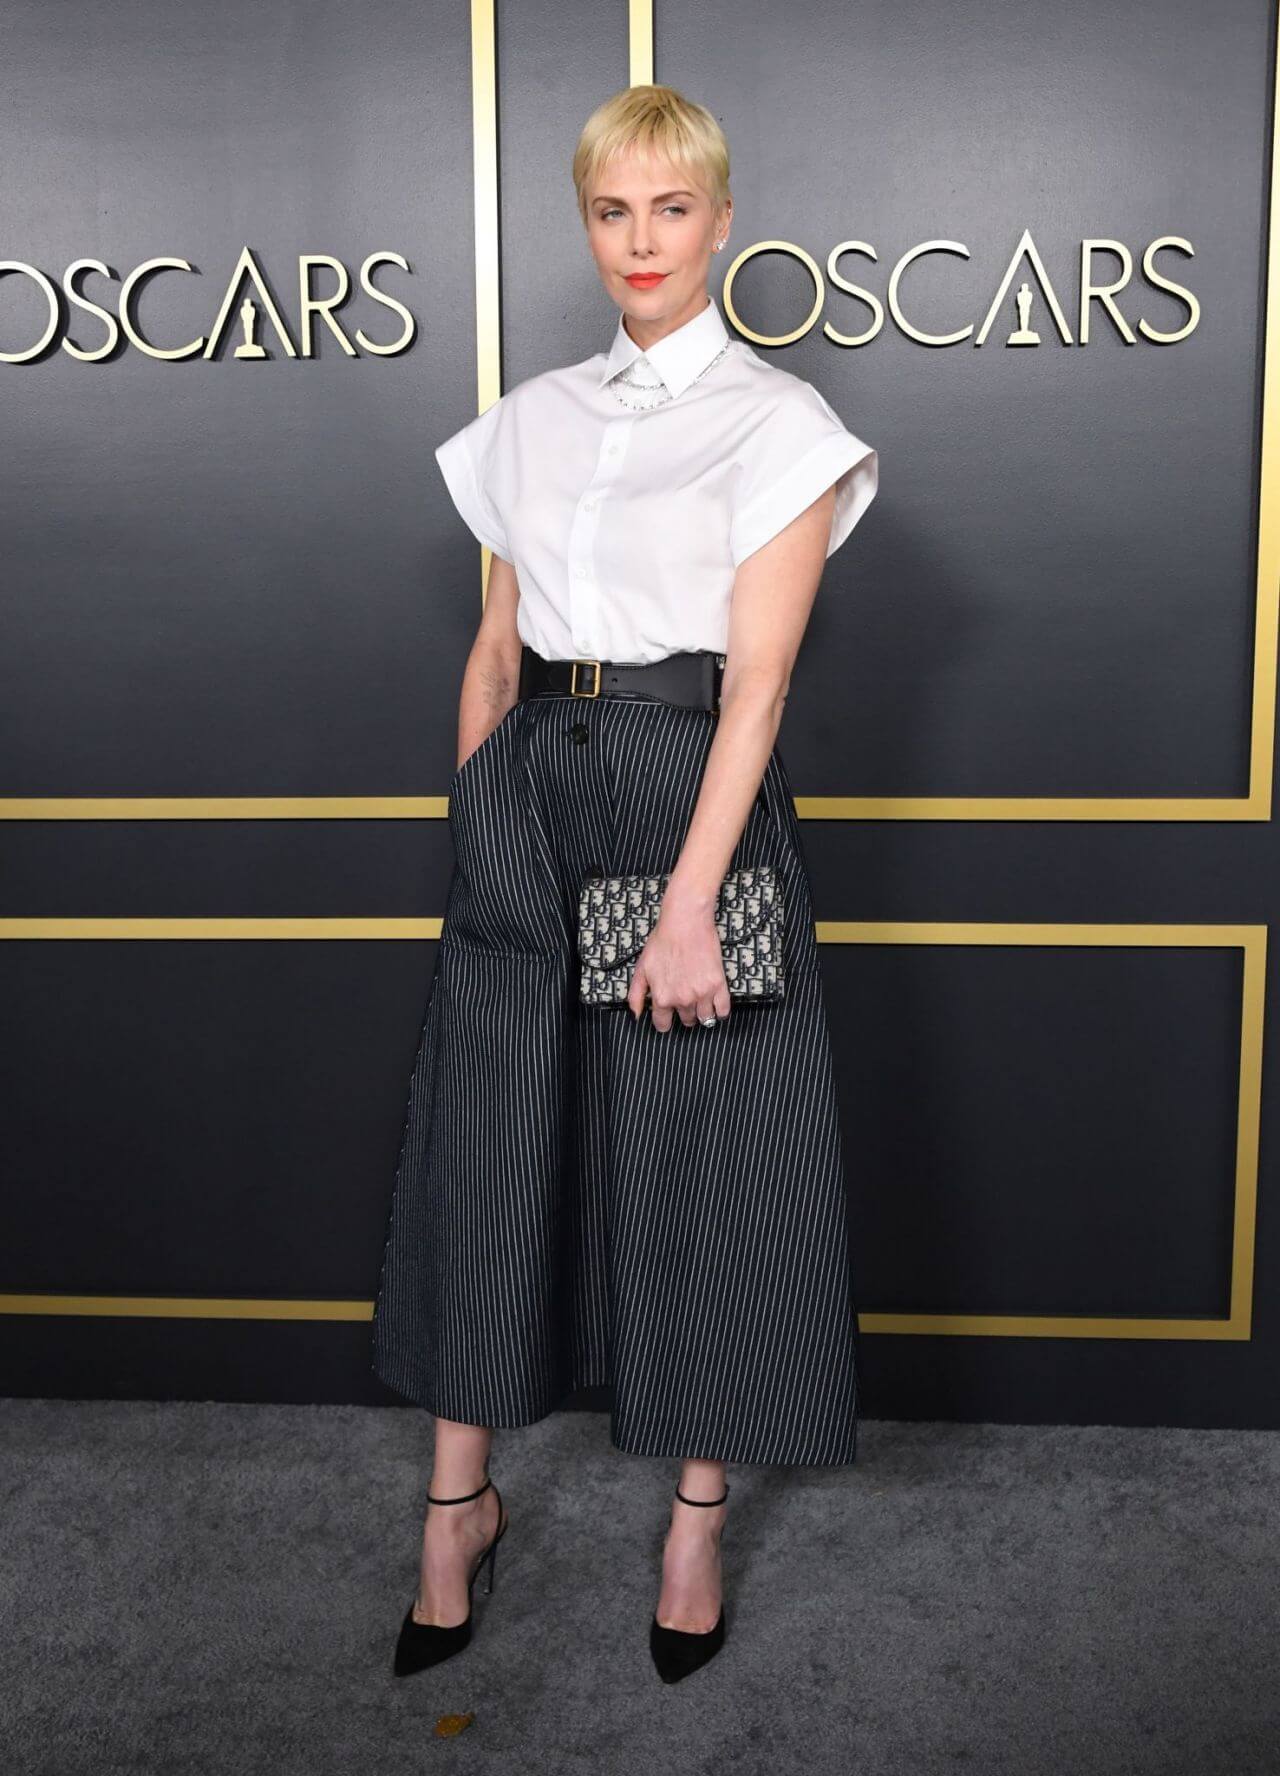 Charlize Theron  In a White Half Sleeves Collar Shirt With Black Striped Flare Pants At Oscars Nominees Luncheon